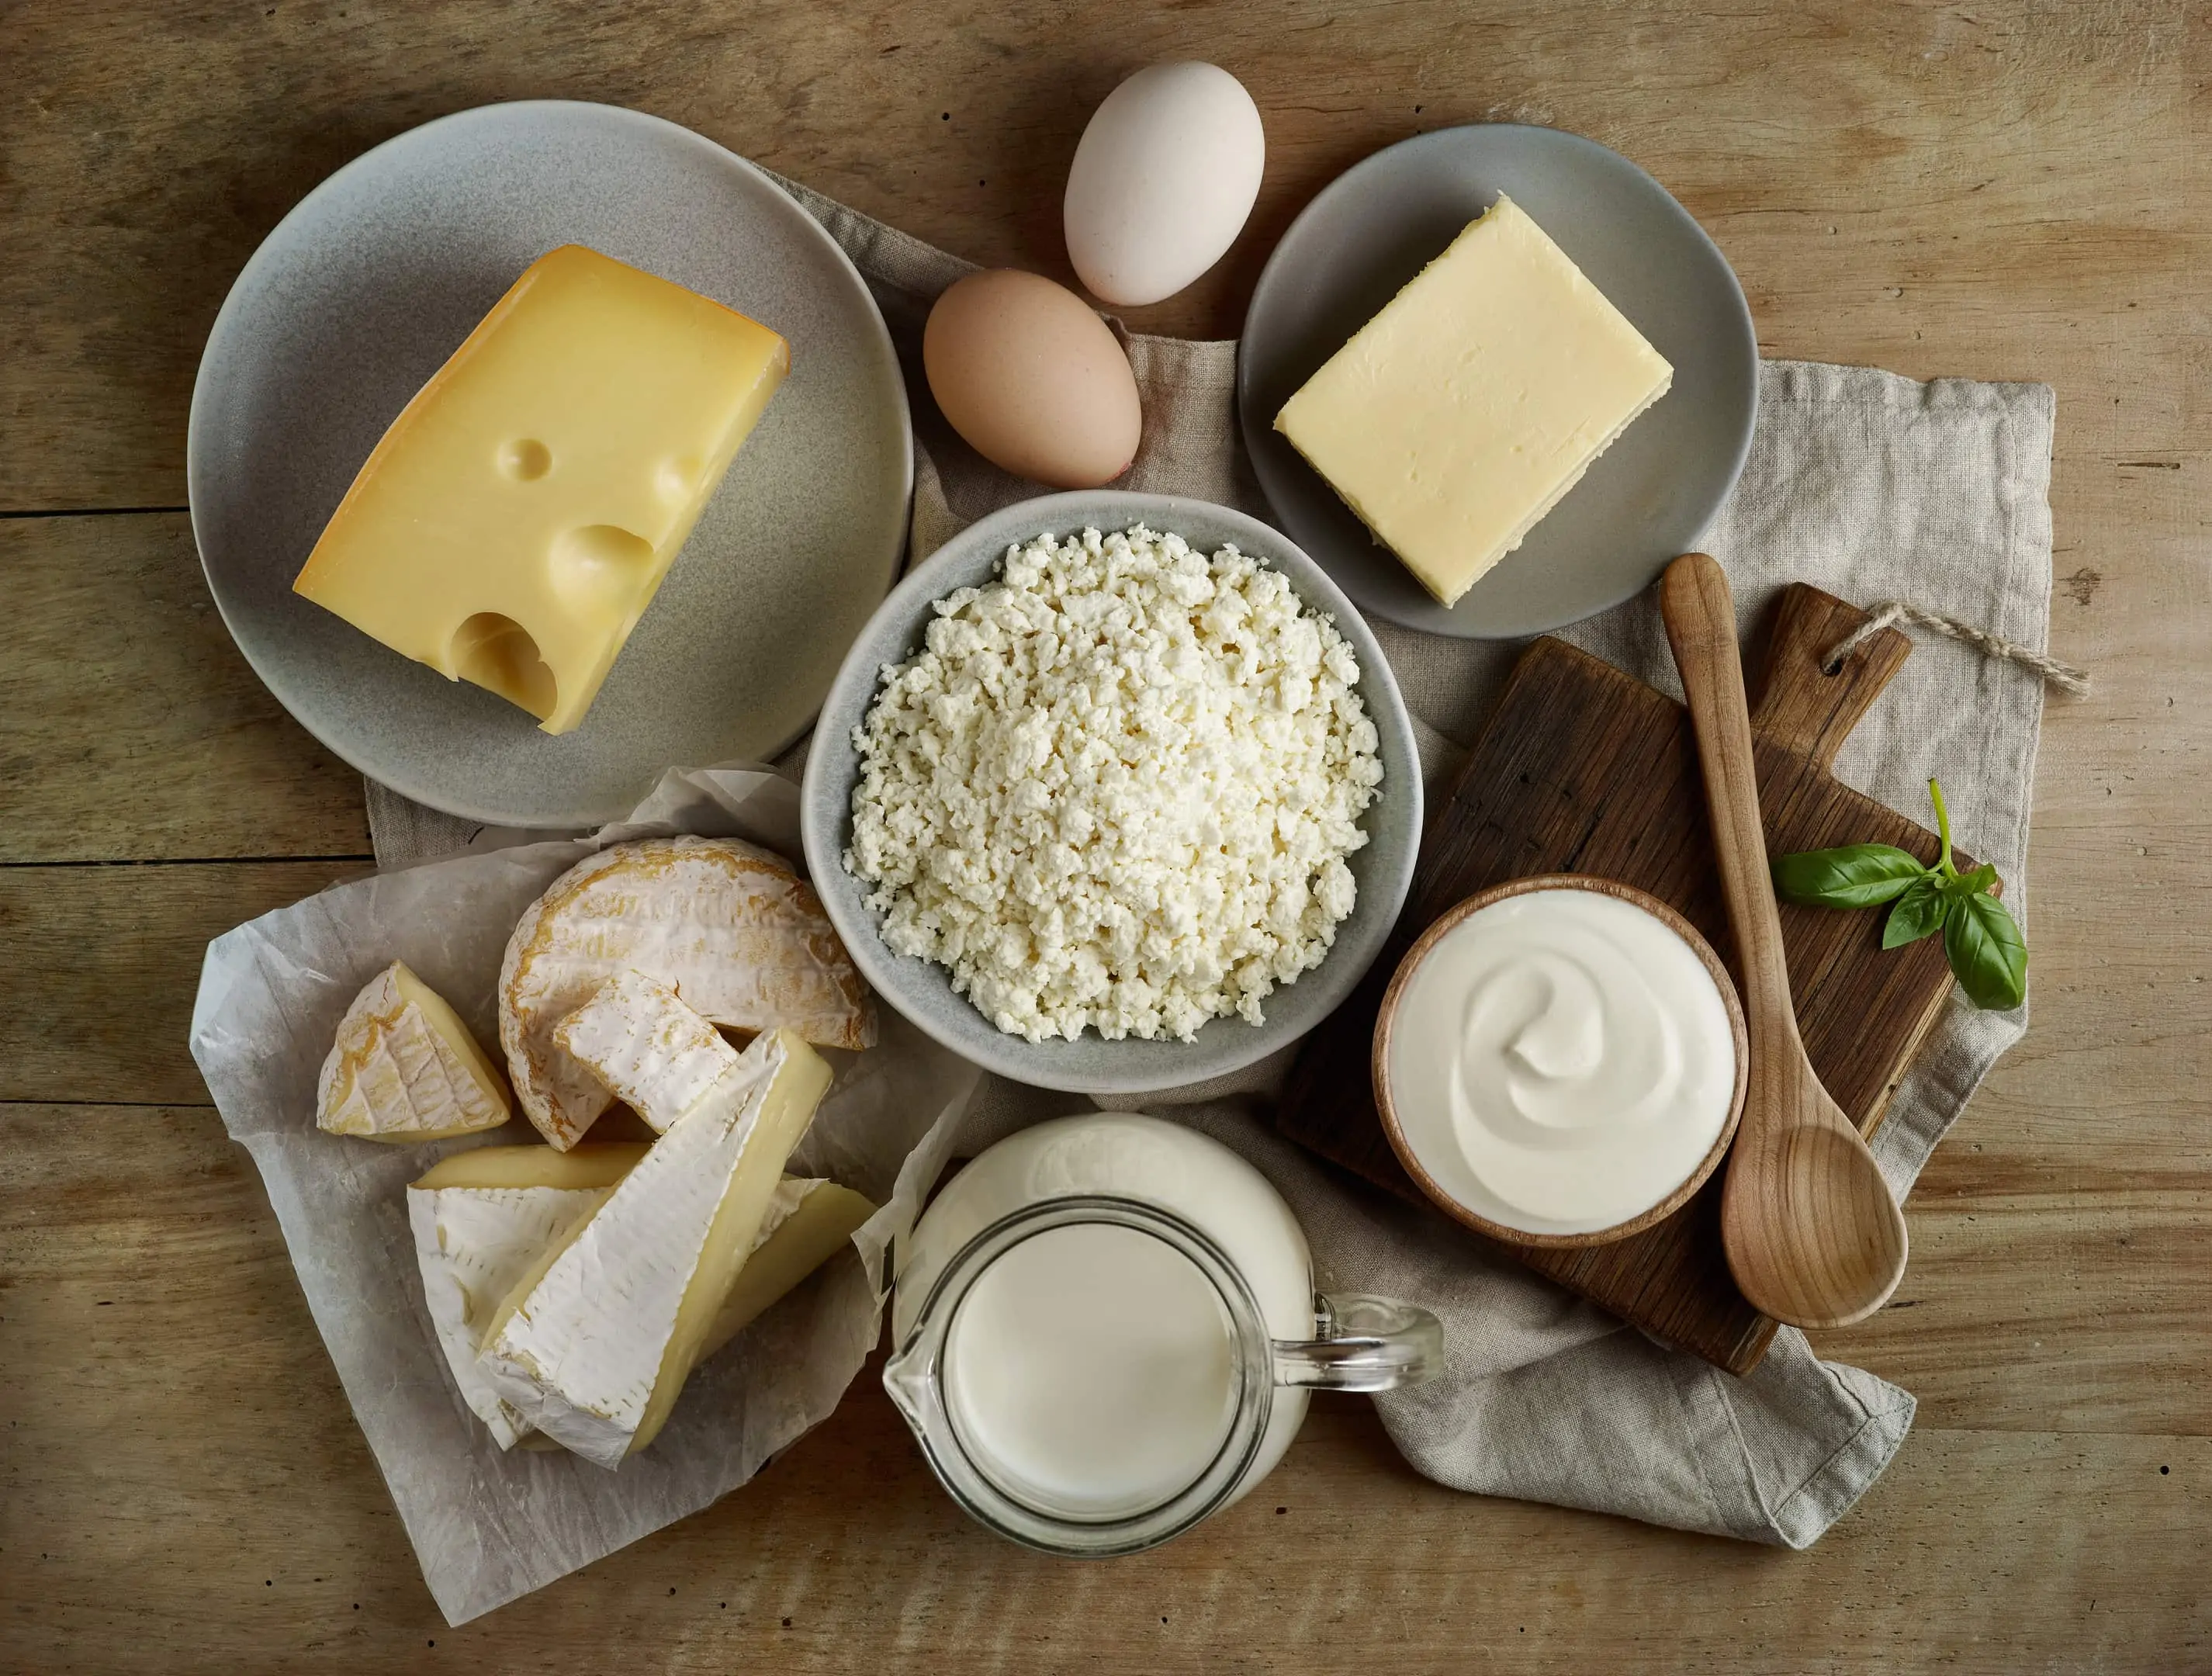 Milk, cottage cheese, cream cheese and butter. Part of the foods to avoid with a fistula.